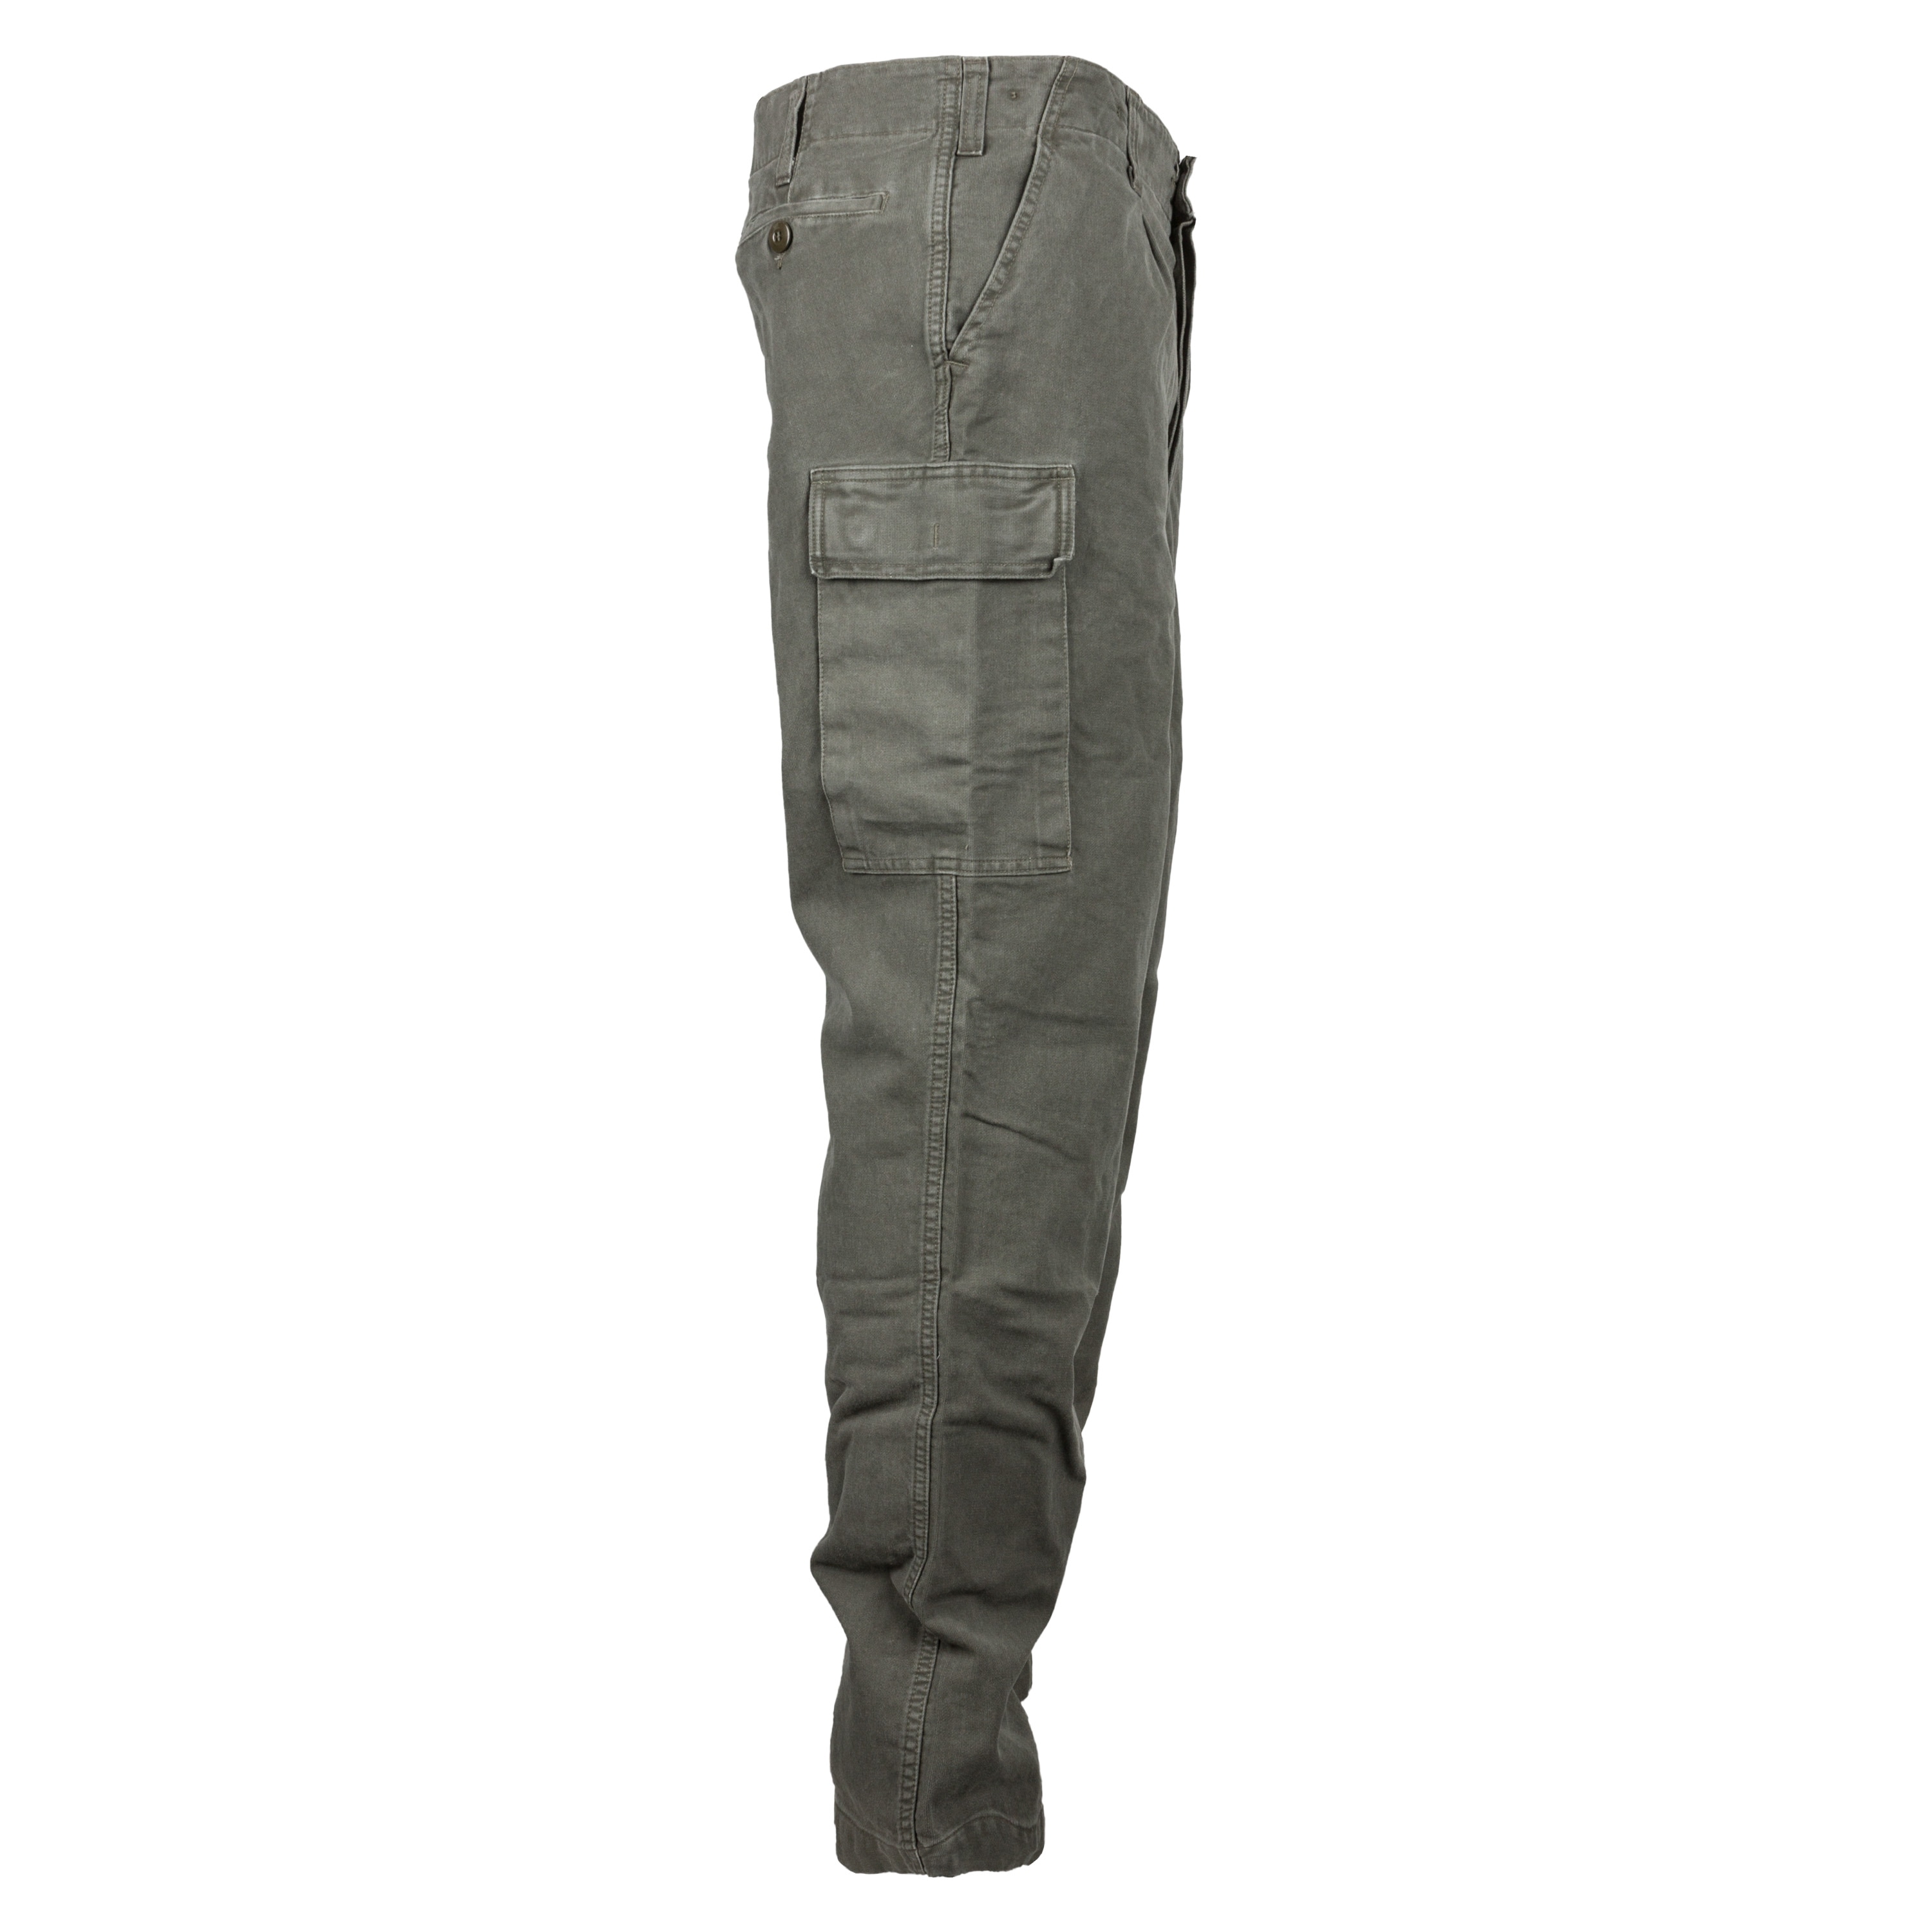 Purchase the Moleskin Pants Prewashed olive by ASMC